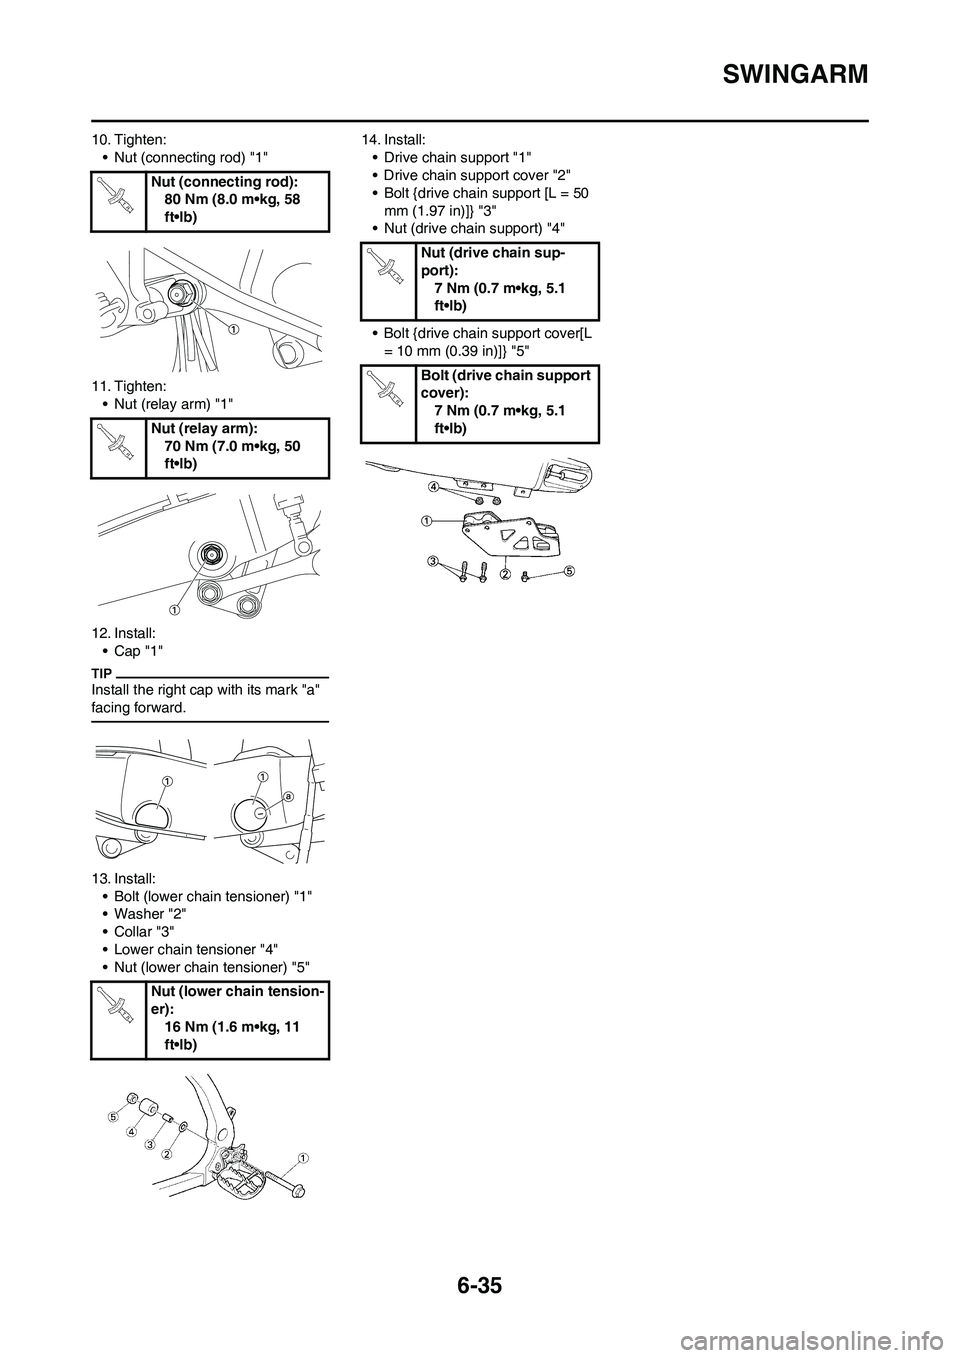 YAMAHA WR 450F 2011  Owners Manual 6-35
SWINGARM
10. Tighten:
• Nut (connecting rod) "1"
11. Tighten:
• Nut (relay arm) "1"
12. Install:
•Cap "1"
Install the right cap with its mark "a" 
facing forward.
13. Install:
• Bolt (low